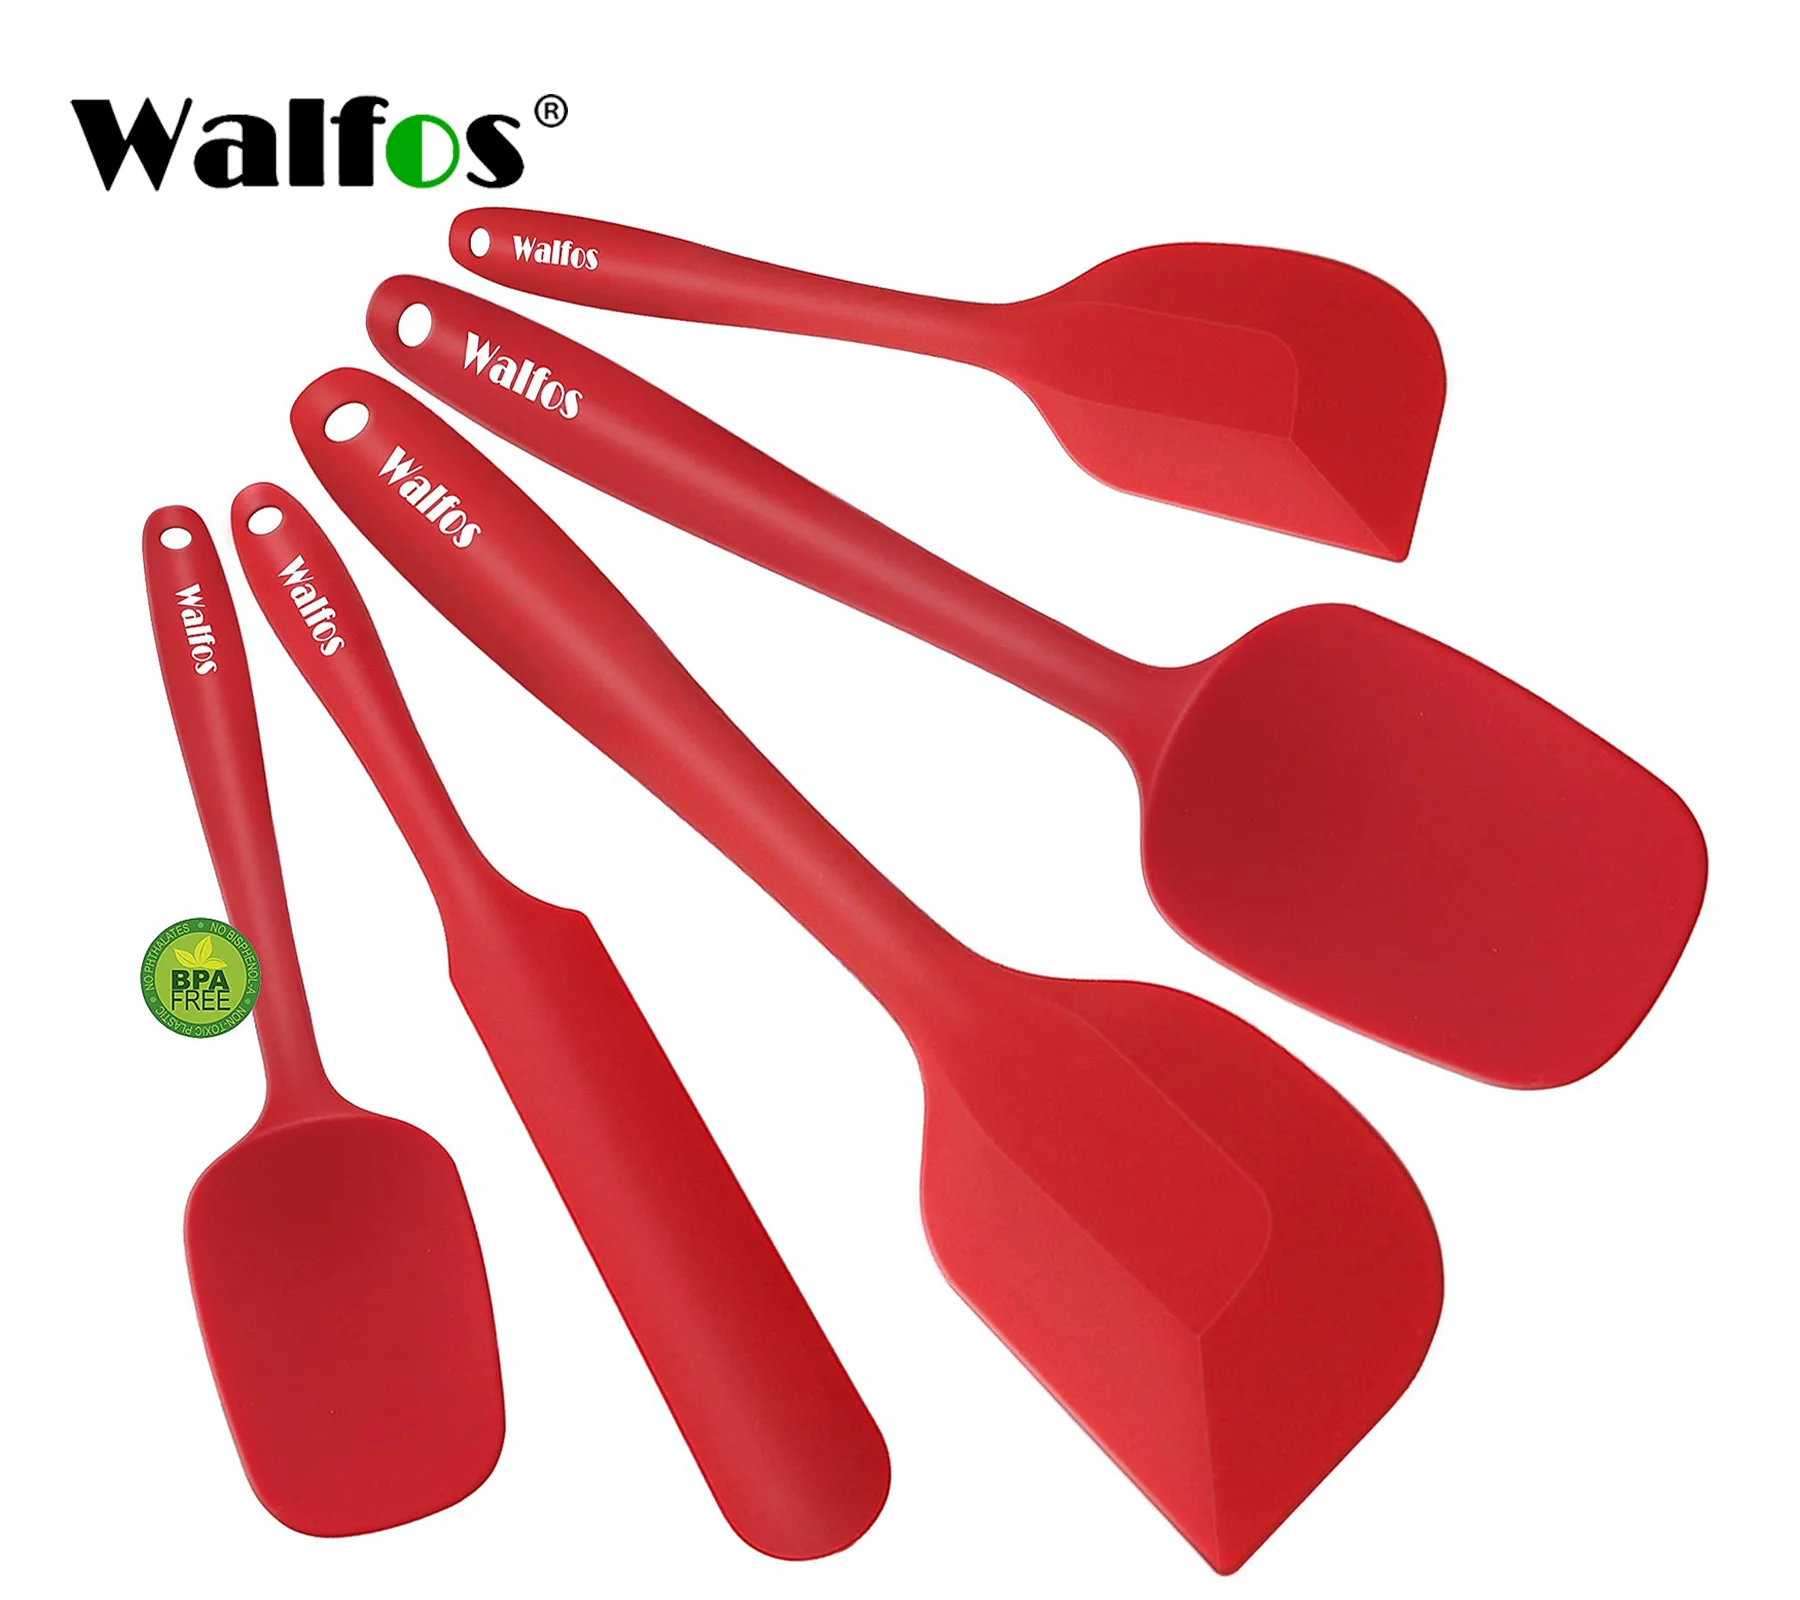 Walfos 5PCS/Set Non-Stick Silicone Spatula Baking Pastry Heat-Resistant Silicone Spatula Kitchen Utensil Cooking Tool